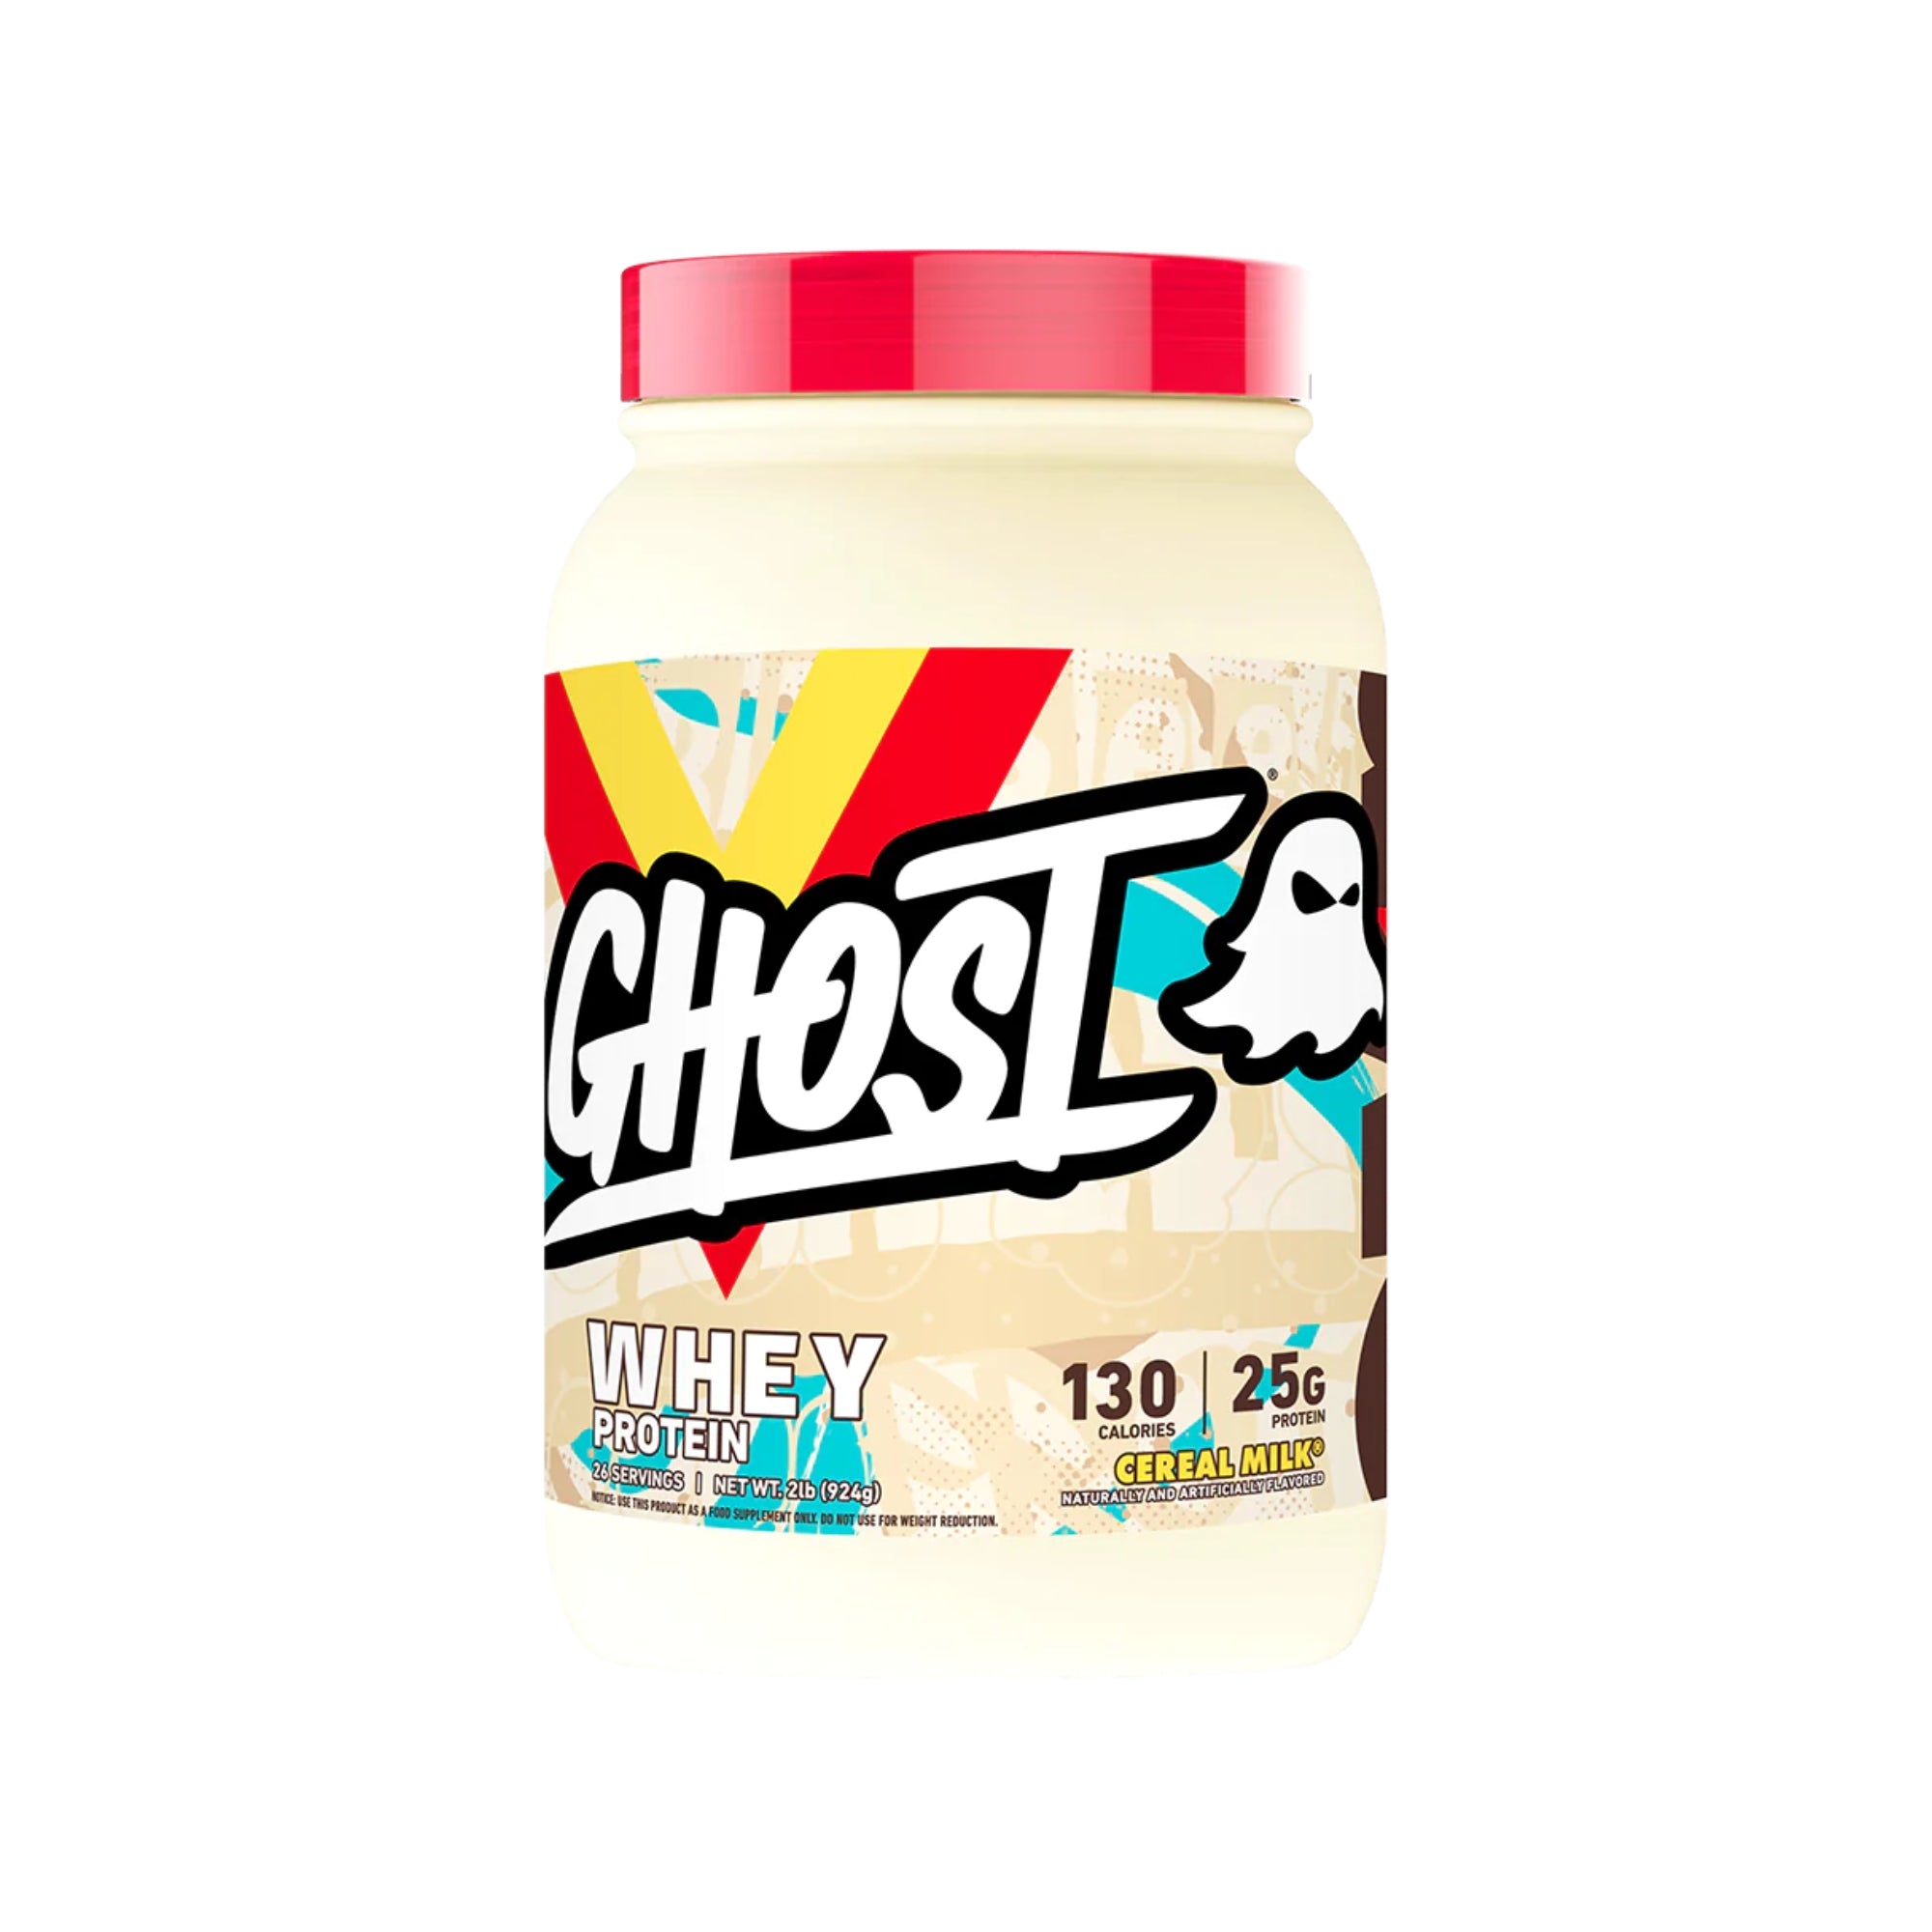 Ghost Whey - Cereal Milk